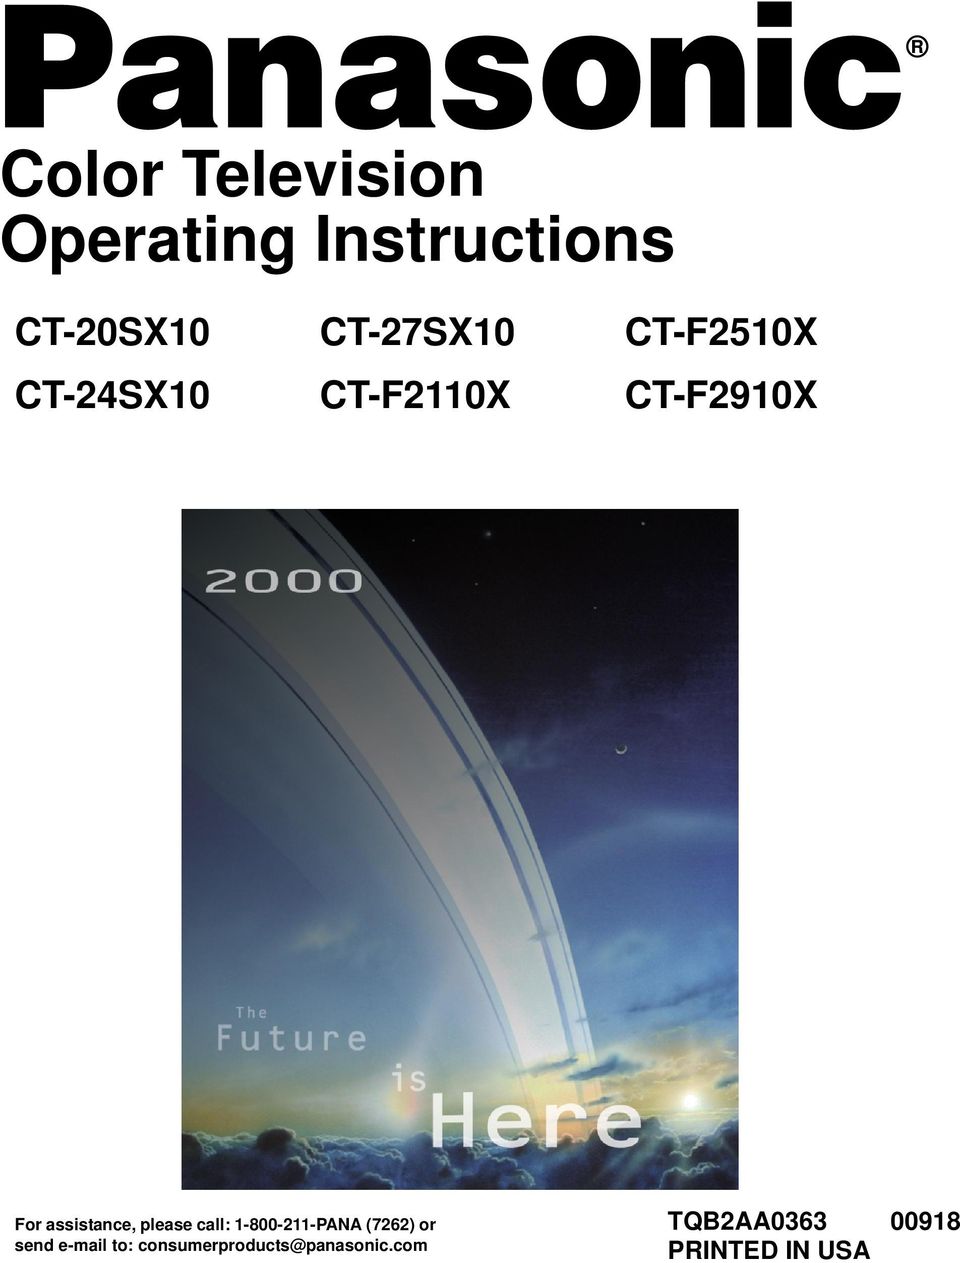 Colo Television Opeating Instctions CT-20SX10 CT-27SX10 CT-F2510X CT-24SX10 CT-F2110X CT-F2910X CT-F2110X CT-24SX10 CT-27SX10